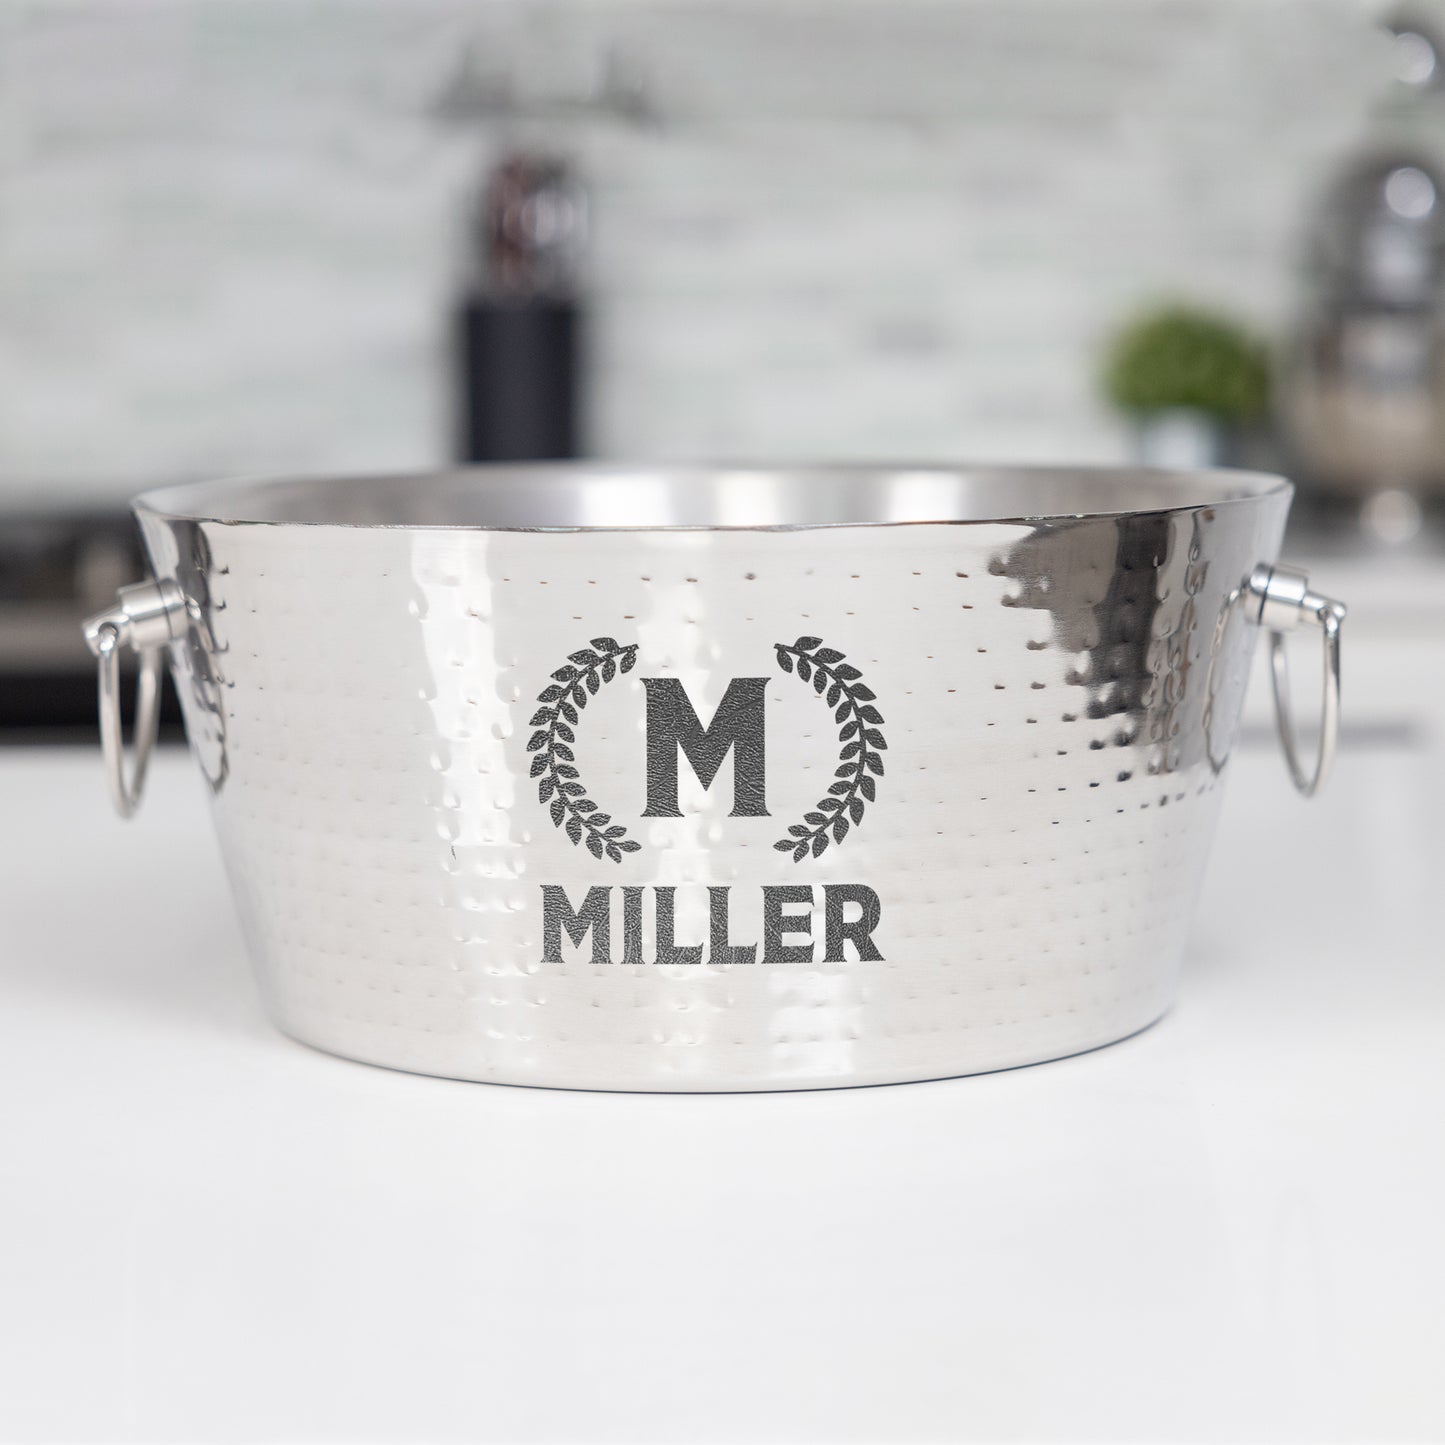 Personalized insulated party tub with double wall build made of stainless steel for kitchen parties and celebrating a wedding, anniversary, birthday, or holiday.  Add custom name, initial, monogram, or personalization.